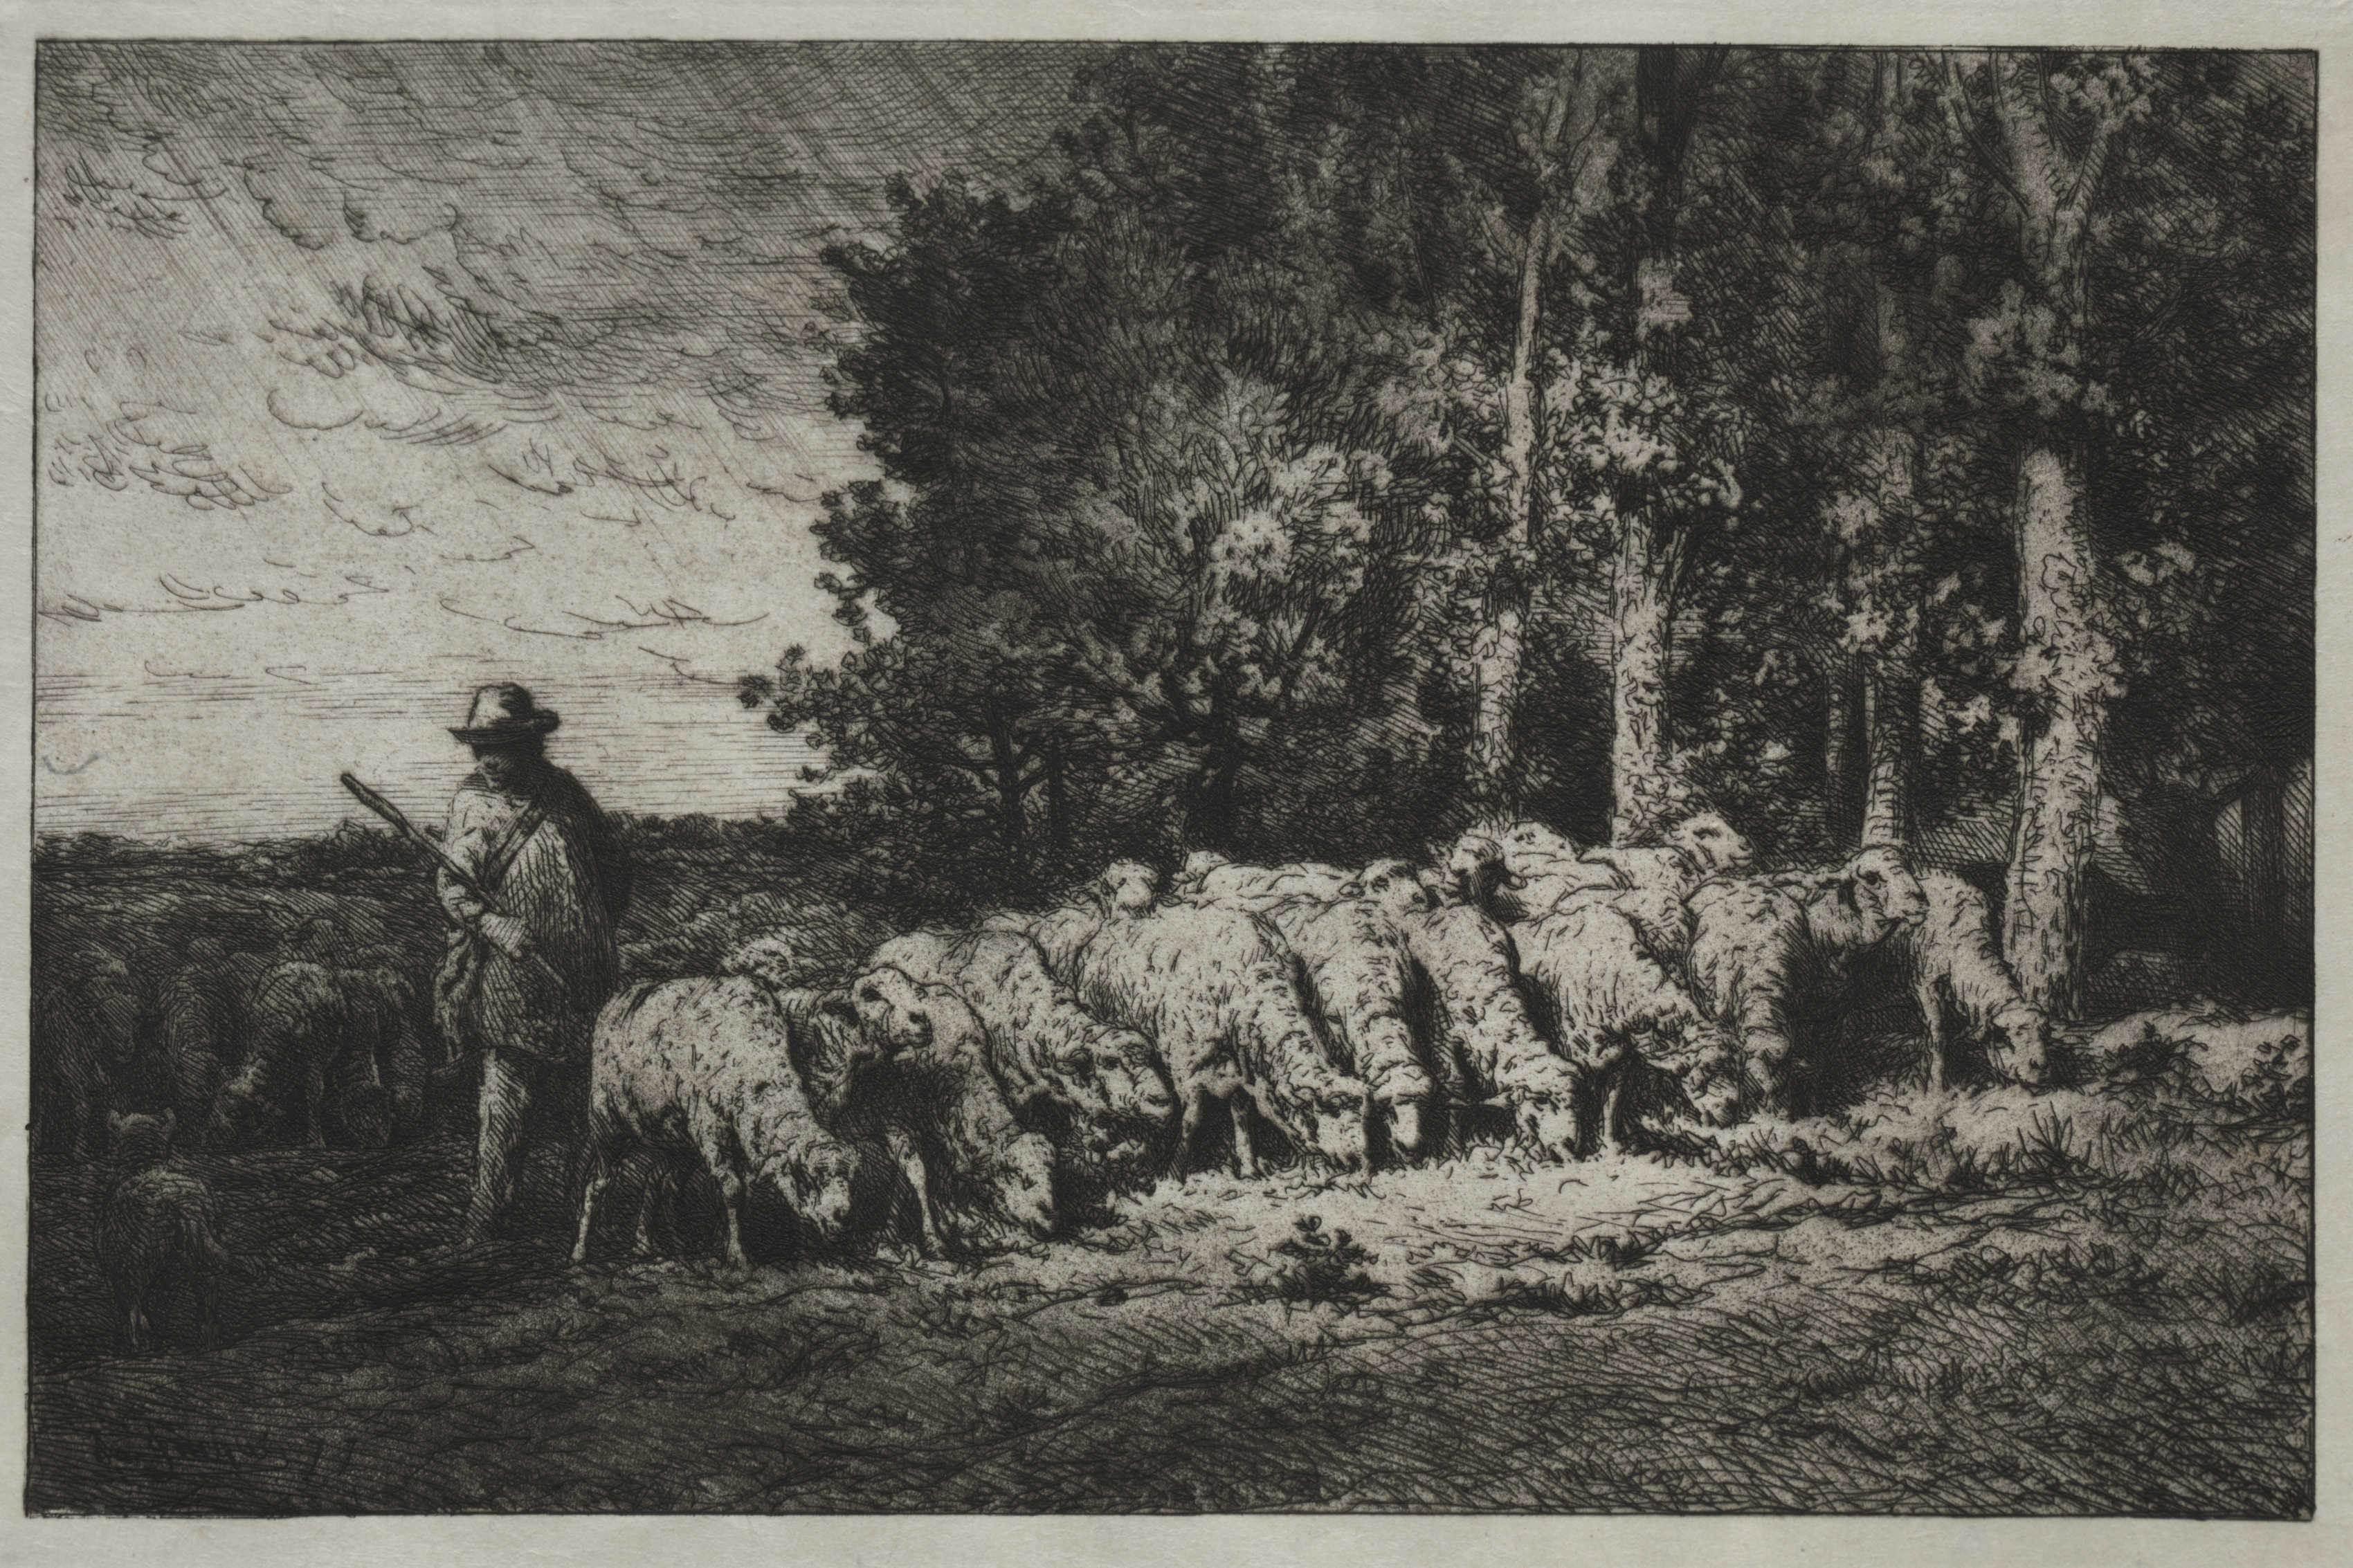 A Herd at the Edge of a Forest